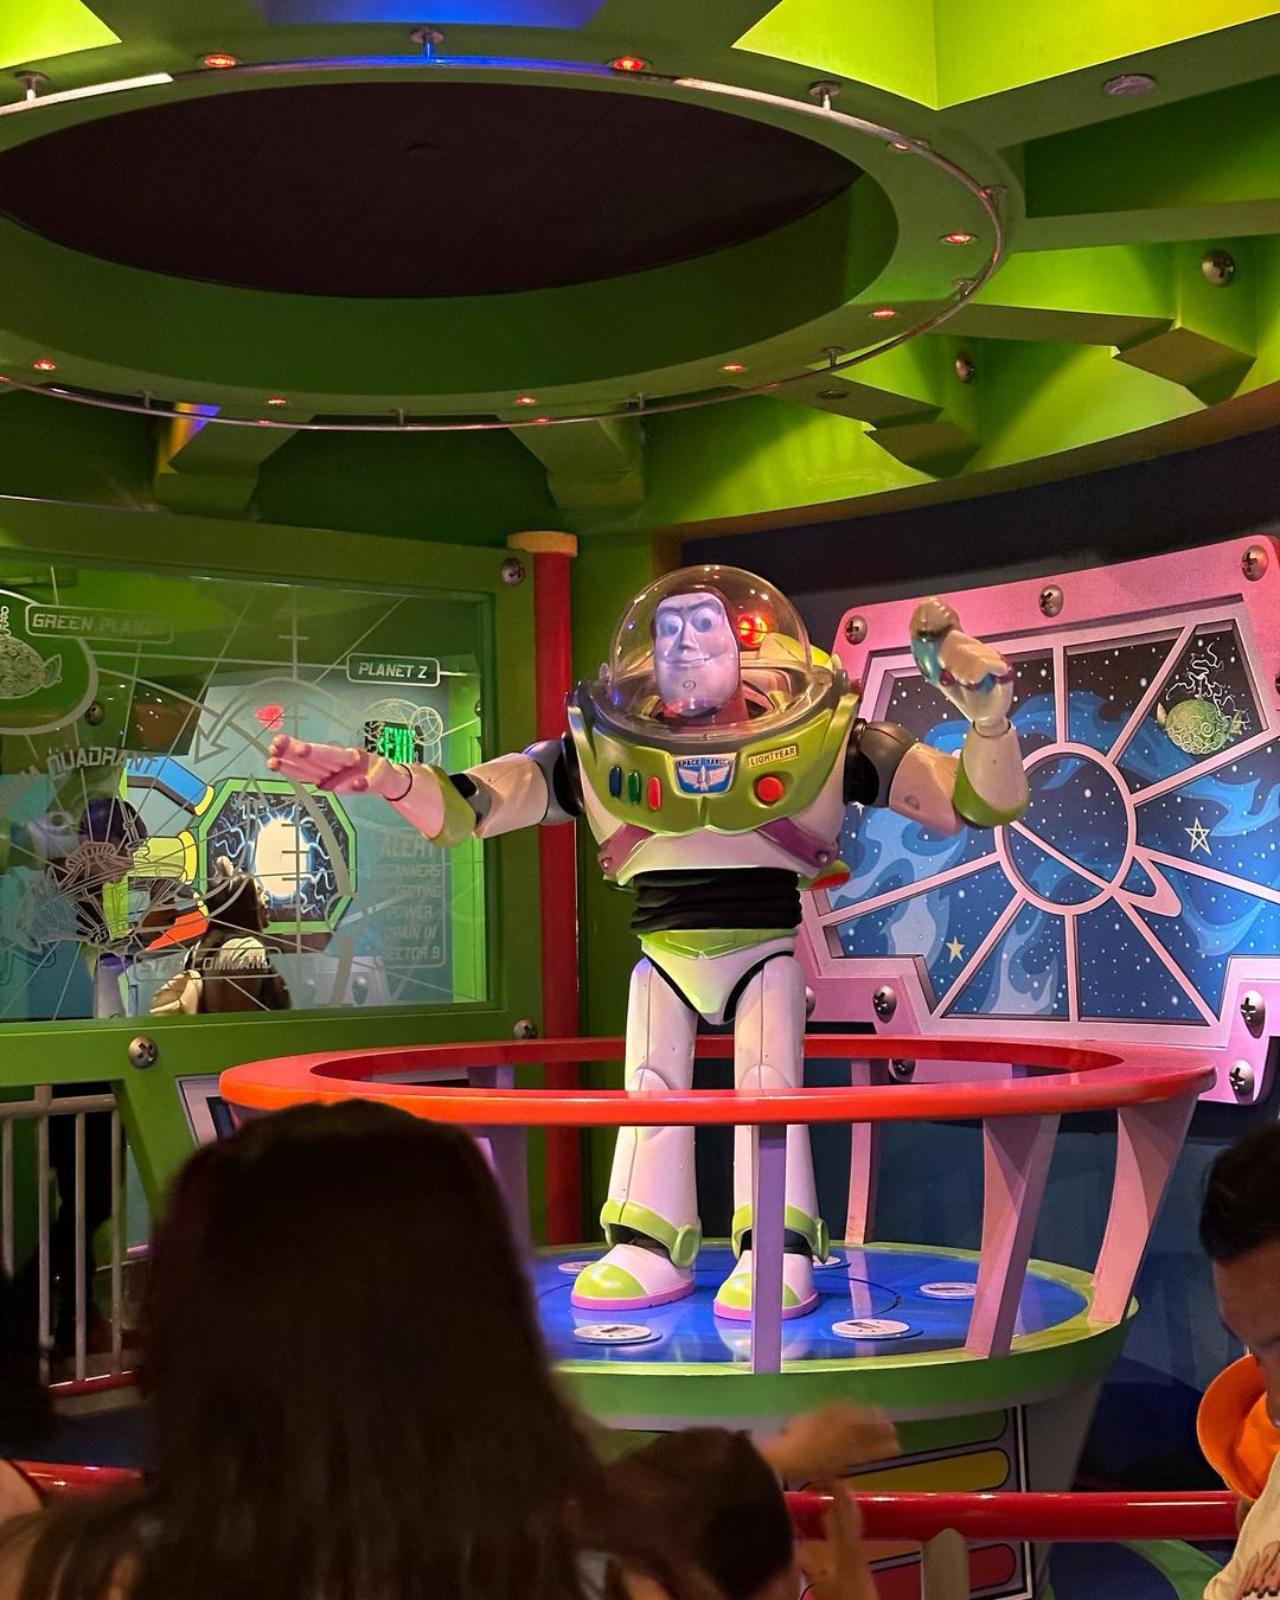 To infinity and beyond! Disneyland would be incomplete without flashy Buzz Lightyear